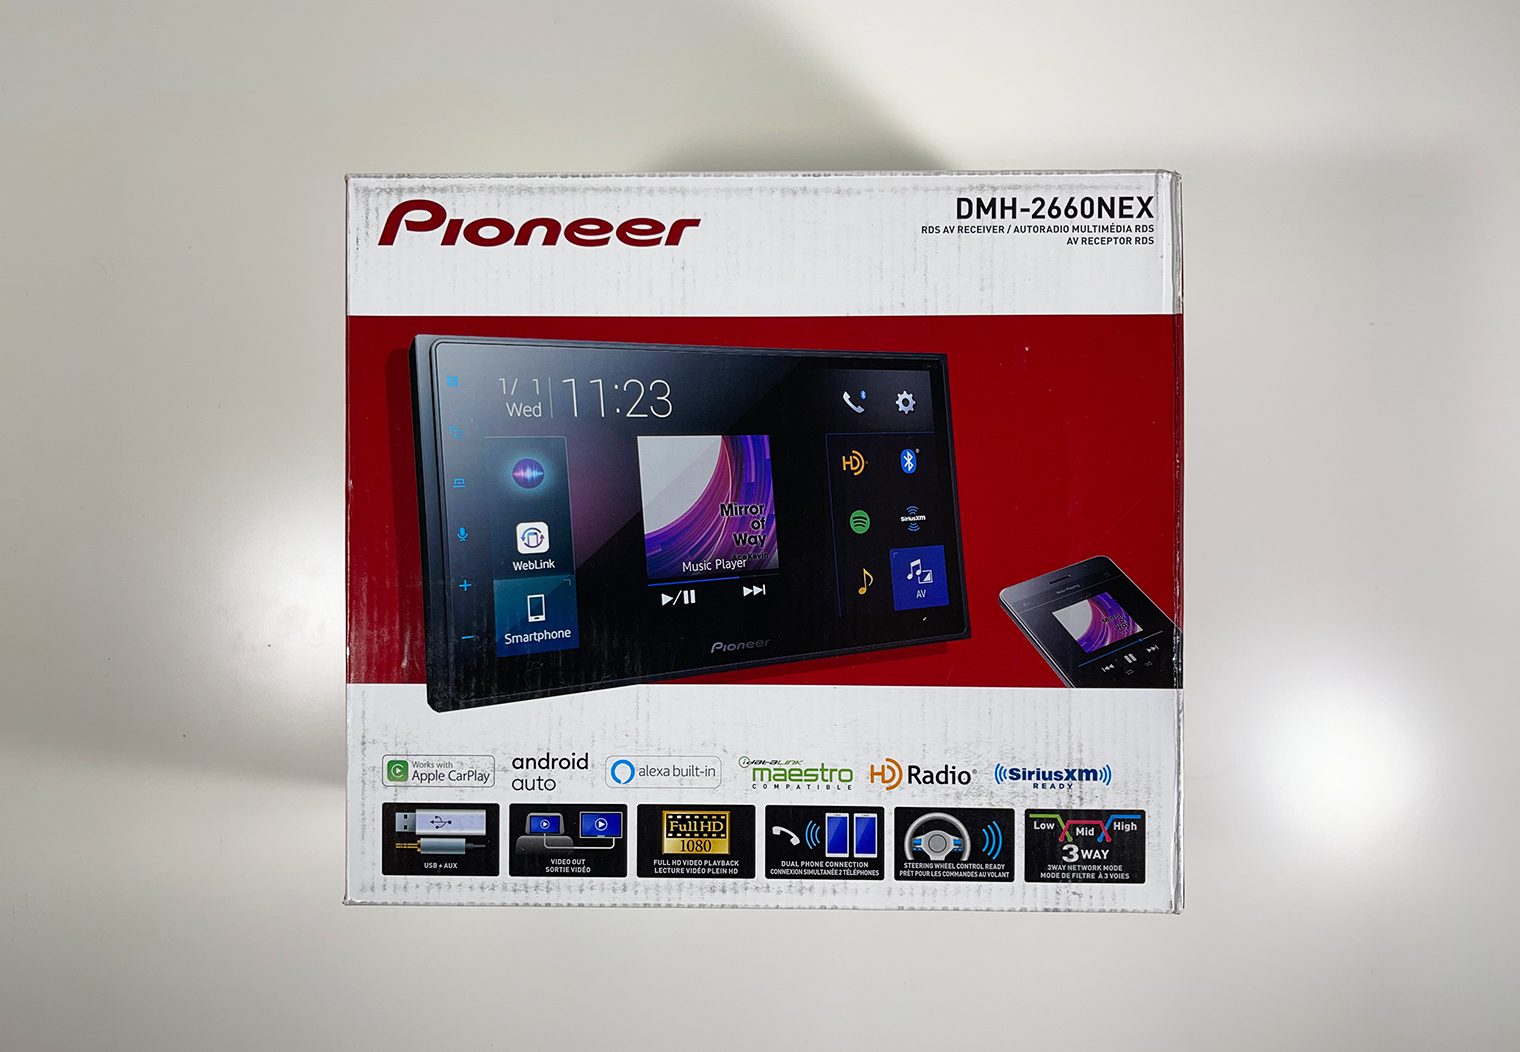 Pioneer DMH-2660NEX in box before opening it up for the first time to review the product